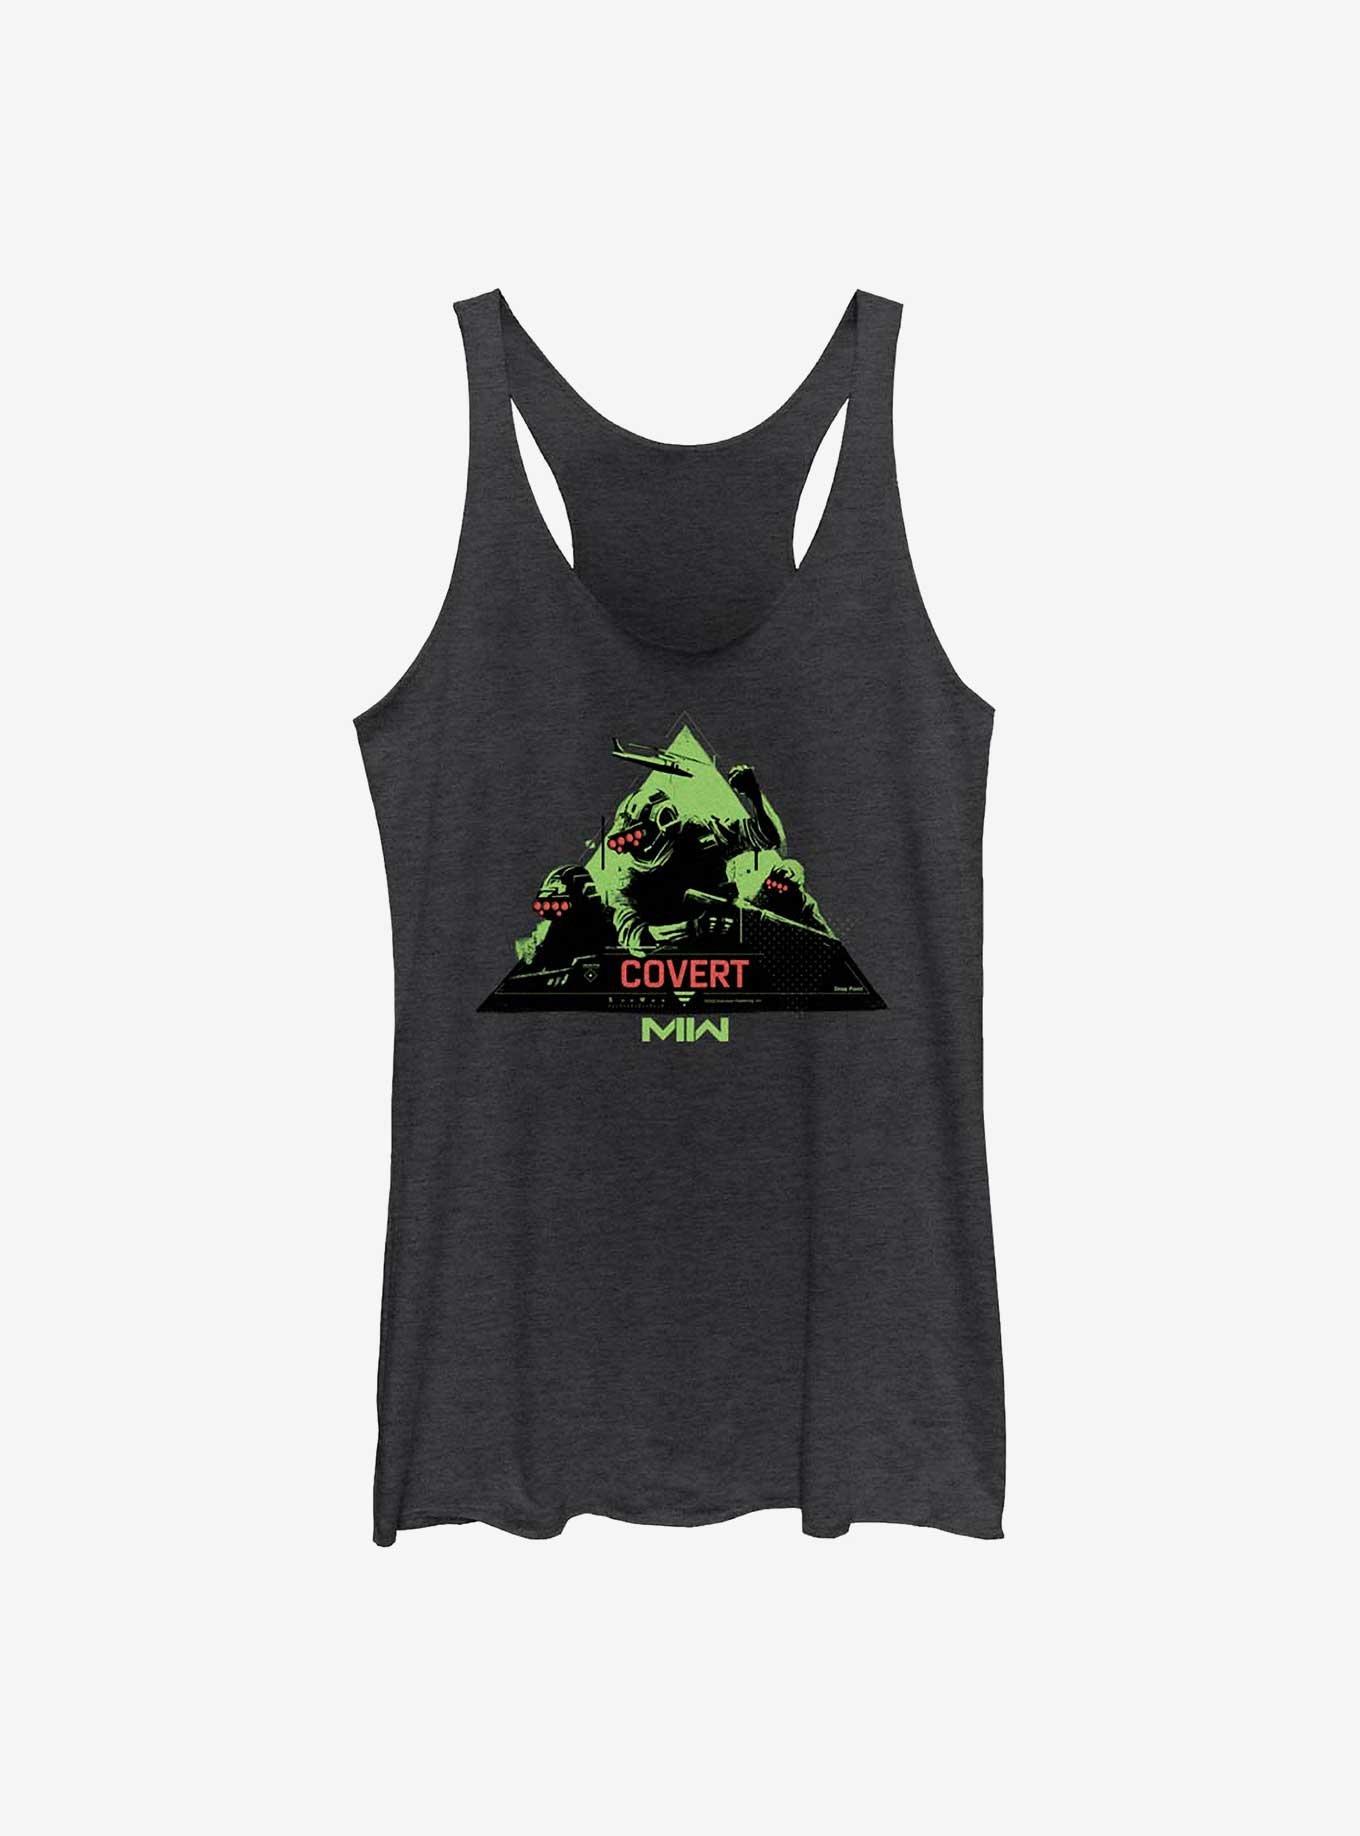 Call of Duty Mission Covert Womens Tank Top, BLK HTR, hi-res